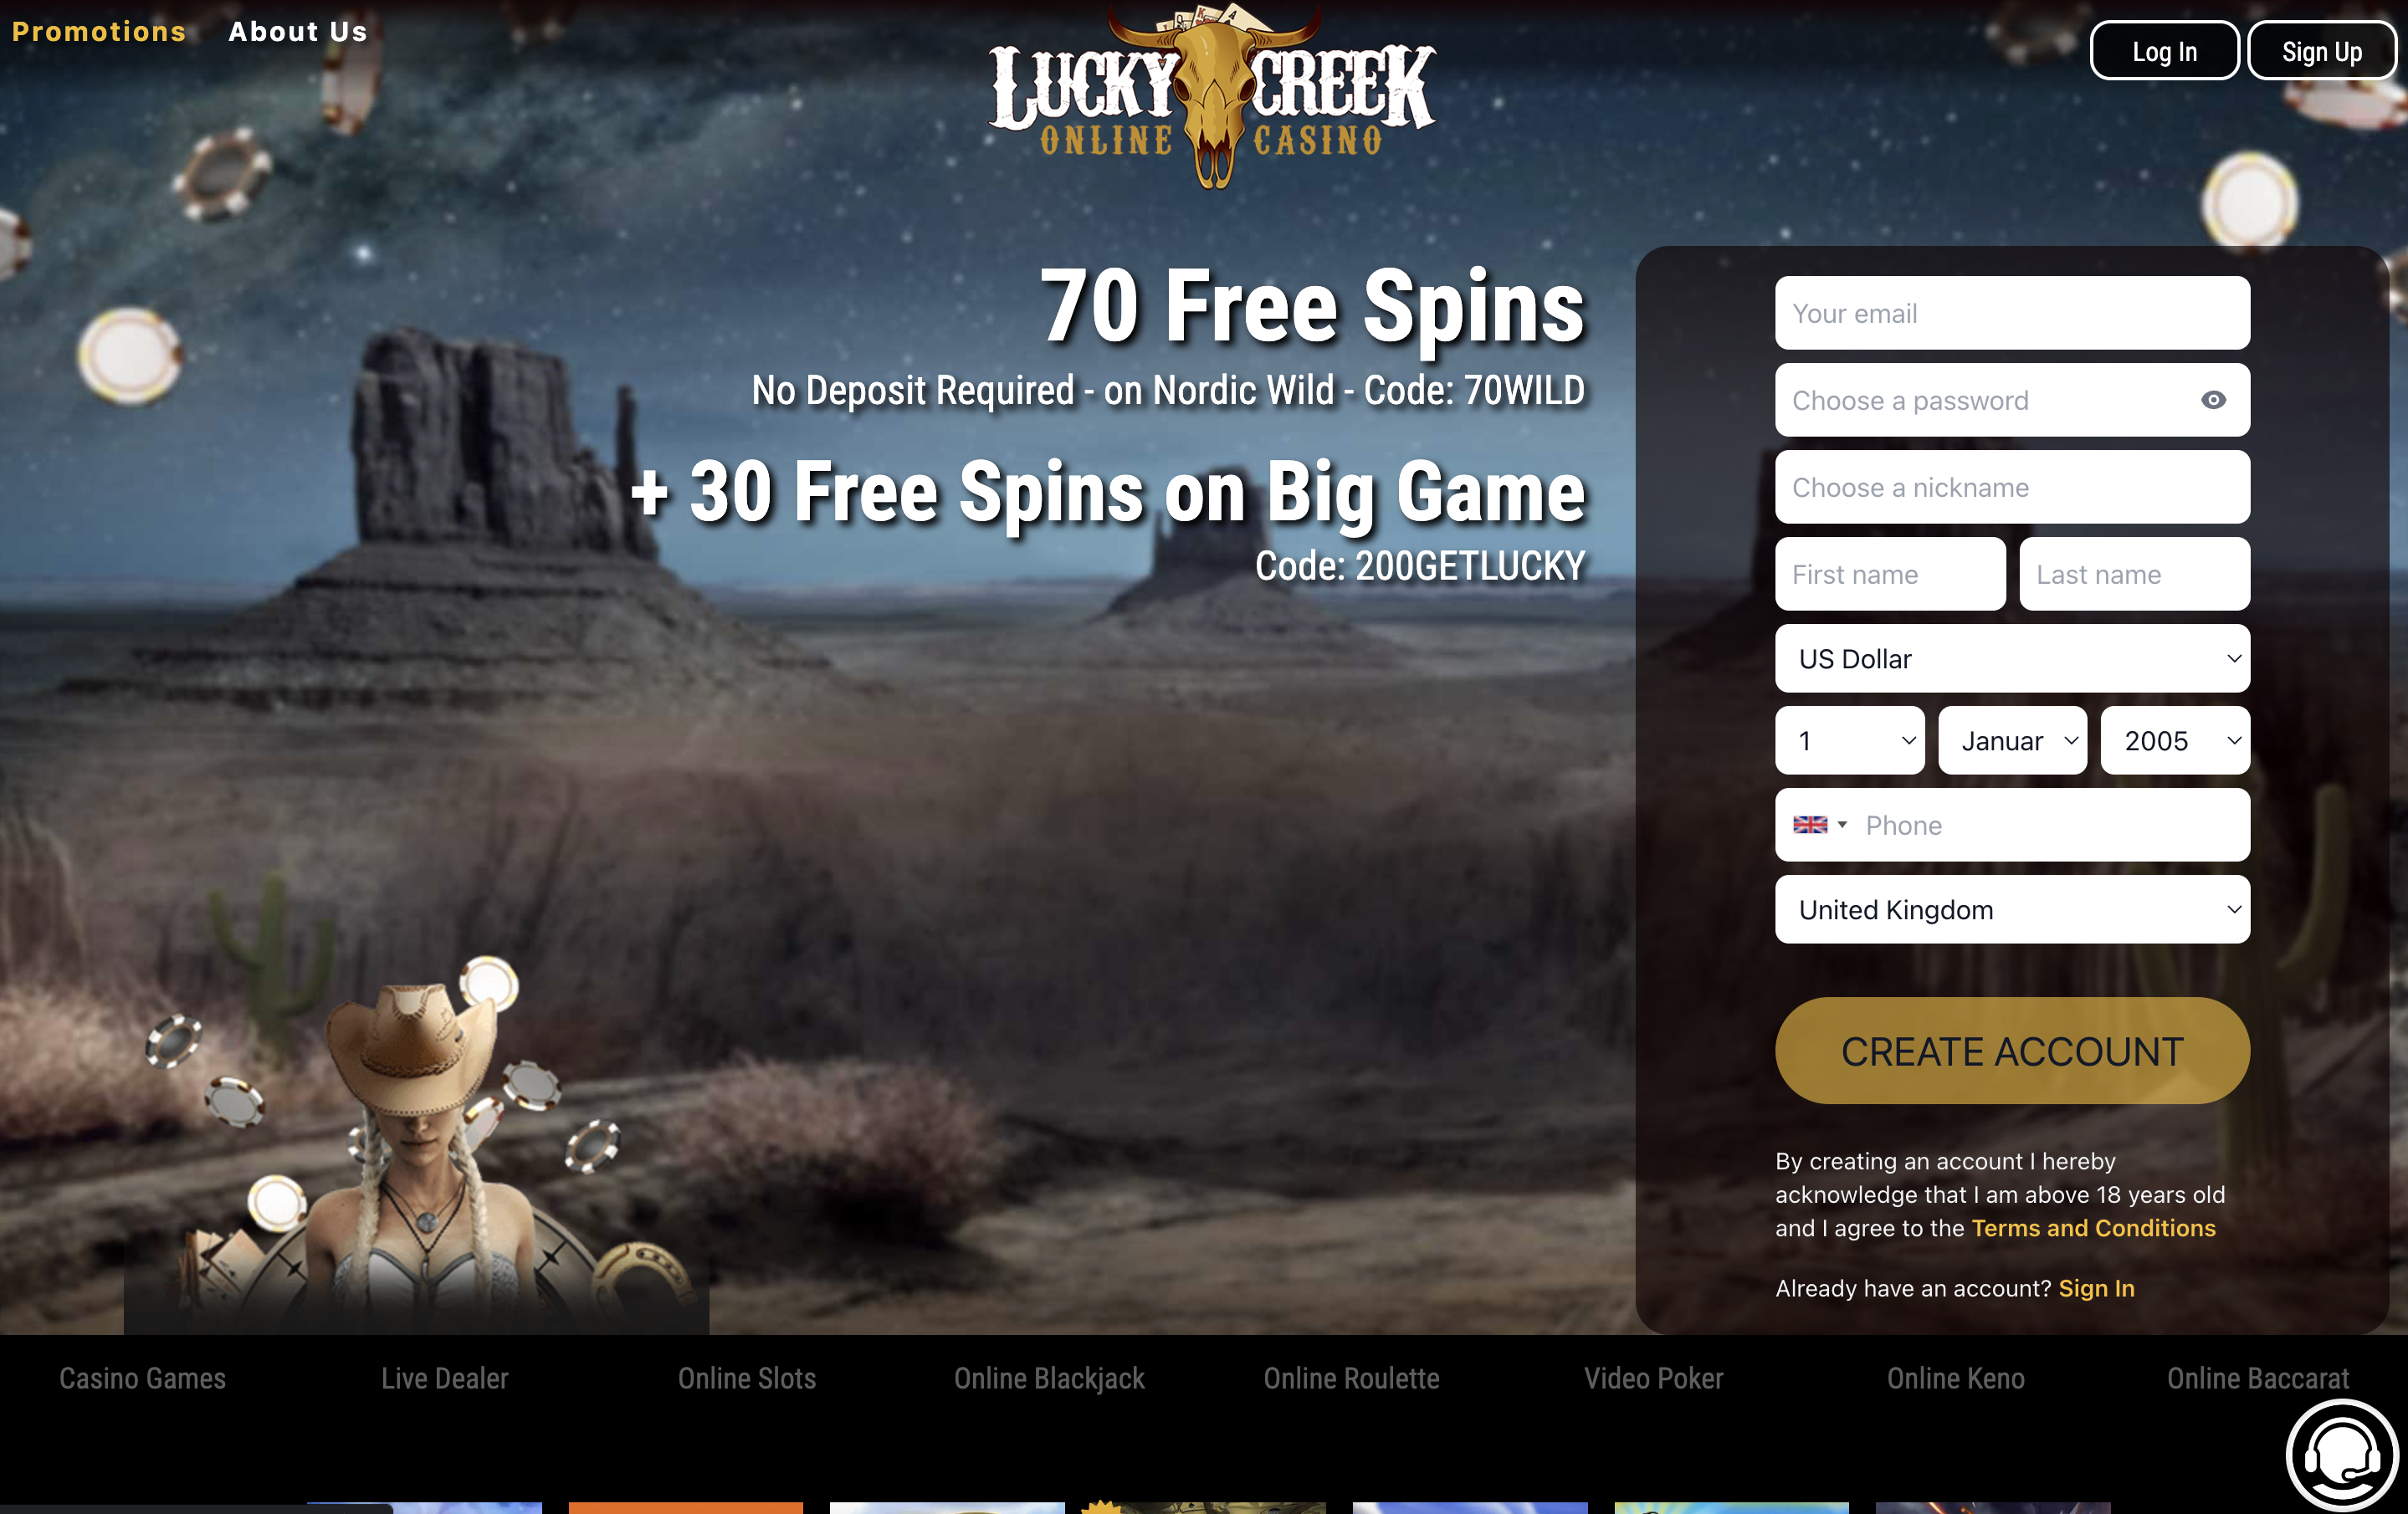 17 Tricks About online casino games win real money You Wish You Knew Before